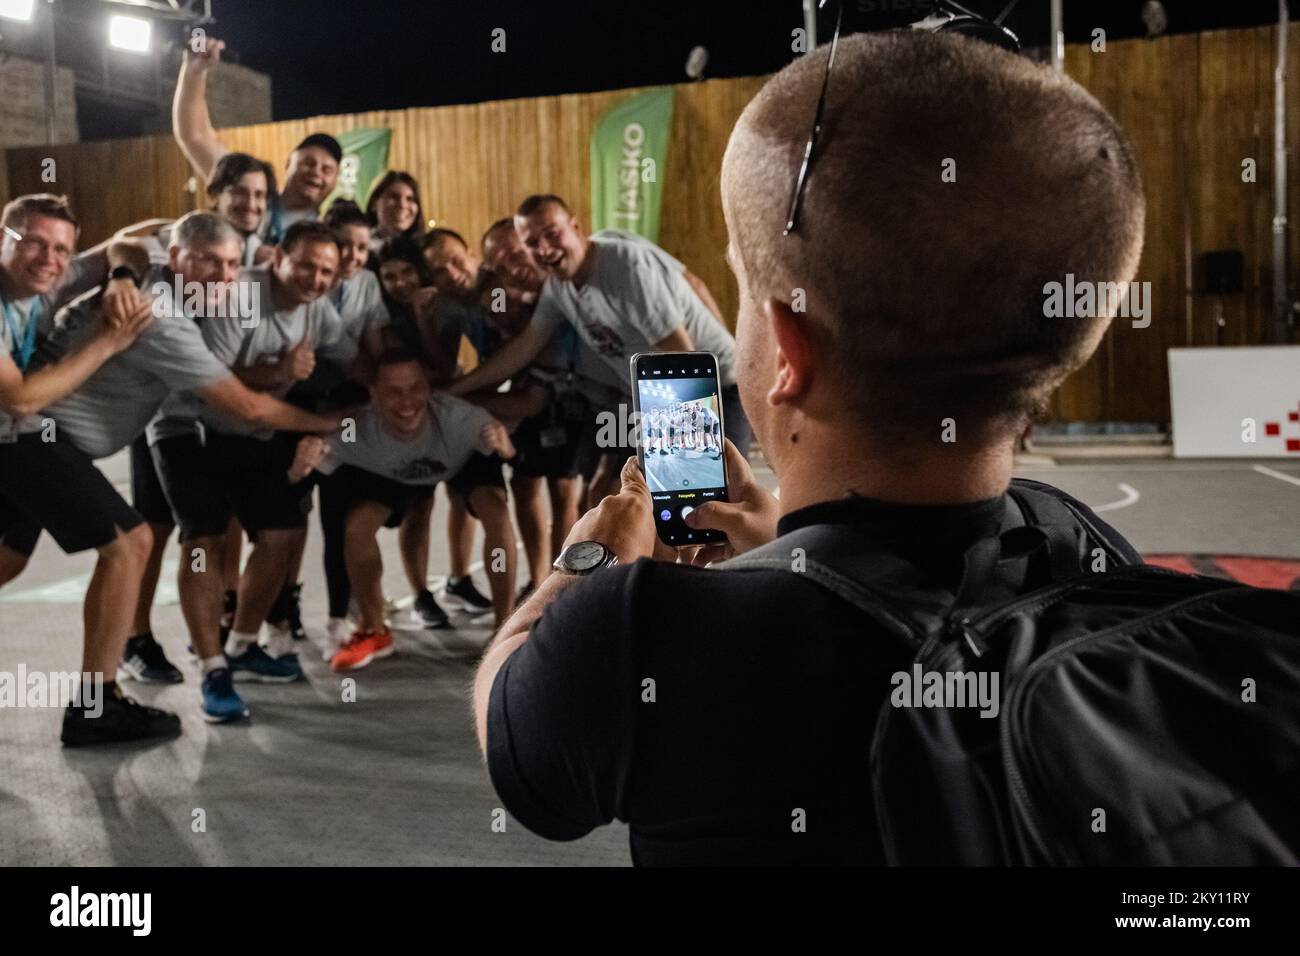 FIBA 3x3 Quest tournament held at St. Michael Fortress , in Sibenik, Croatia, on May 21, 2022. . PRO 3x3 Tour - Croatian Open championship in 3x3 basketball, which held from 13.05.2022 to 10.09.2022 has FIBA QUEST status, and the winner of Tour Final event in Pula will travel to Paris, France where he will qualify for Qualifying Draw of World Tour.All tournaments, that are played in various attractive locations all trough Croatia in organization by Energy Basket d.o.o., Pro 3x3 Association and Croatian Basketball Federation, have international character. Photo:  Stock Photo